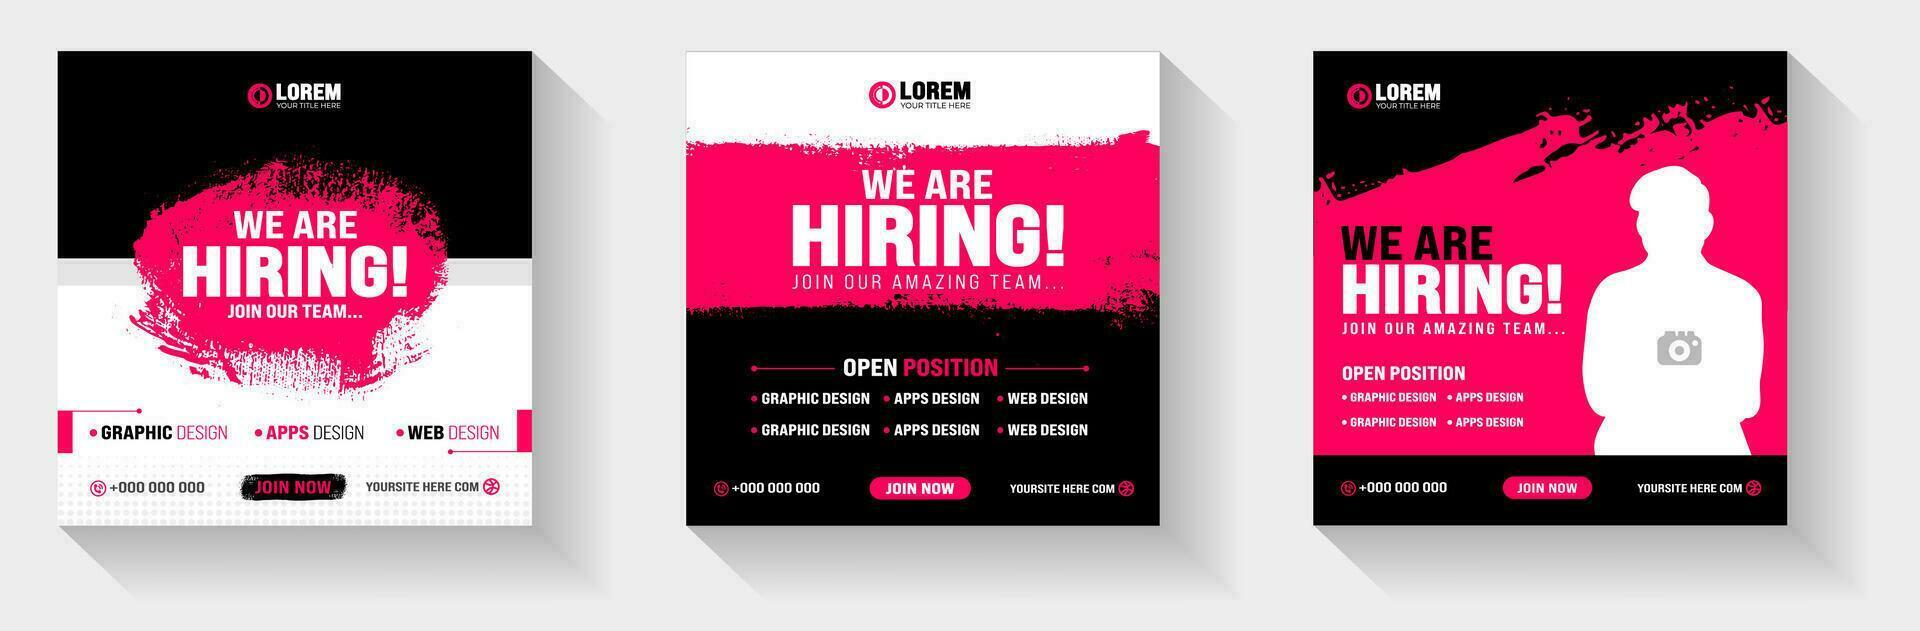 watercolor paint brush strokes texture We are hiring job vacancy social media post banner template with black and red color. Grunge brush stroke effect We are hiring social media post banner set. vector